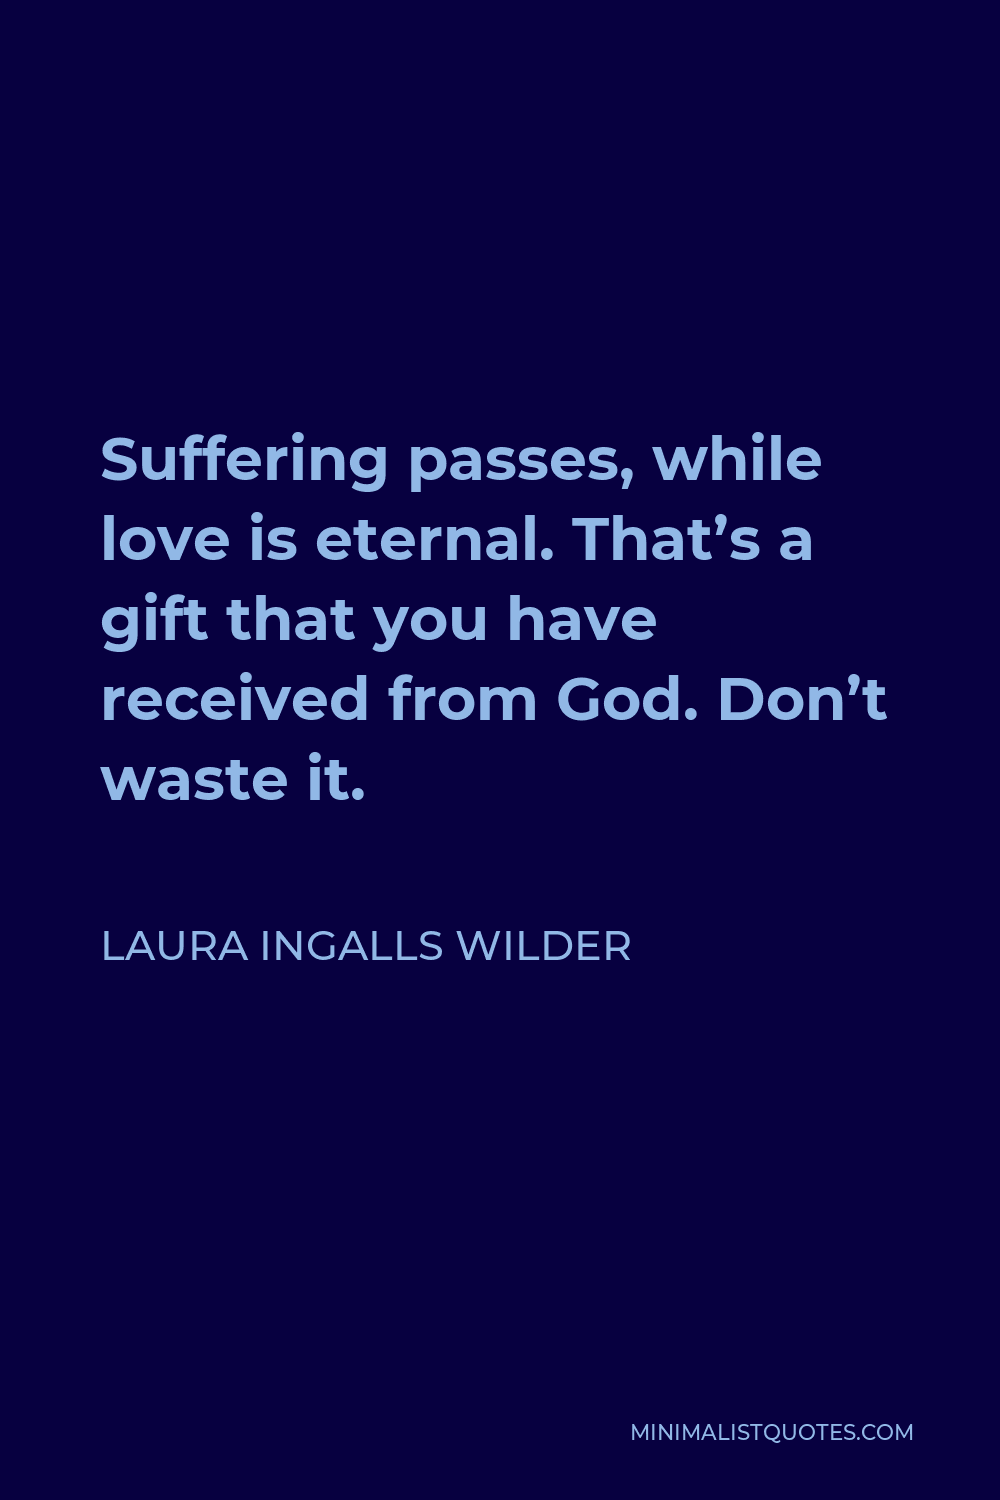 Laura Ingalls Wilder Quote - Suffering passes, while love is eternal. That’s a gift that you have received from God. Don’t waste it.